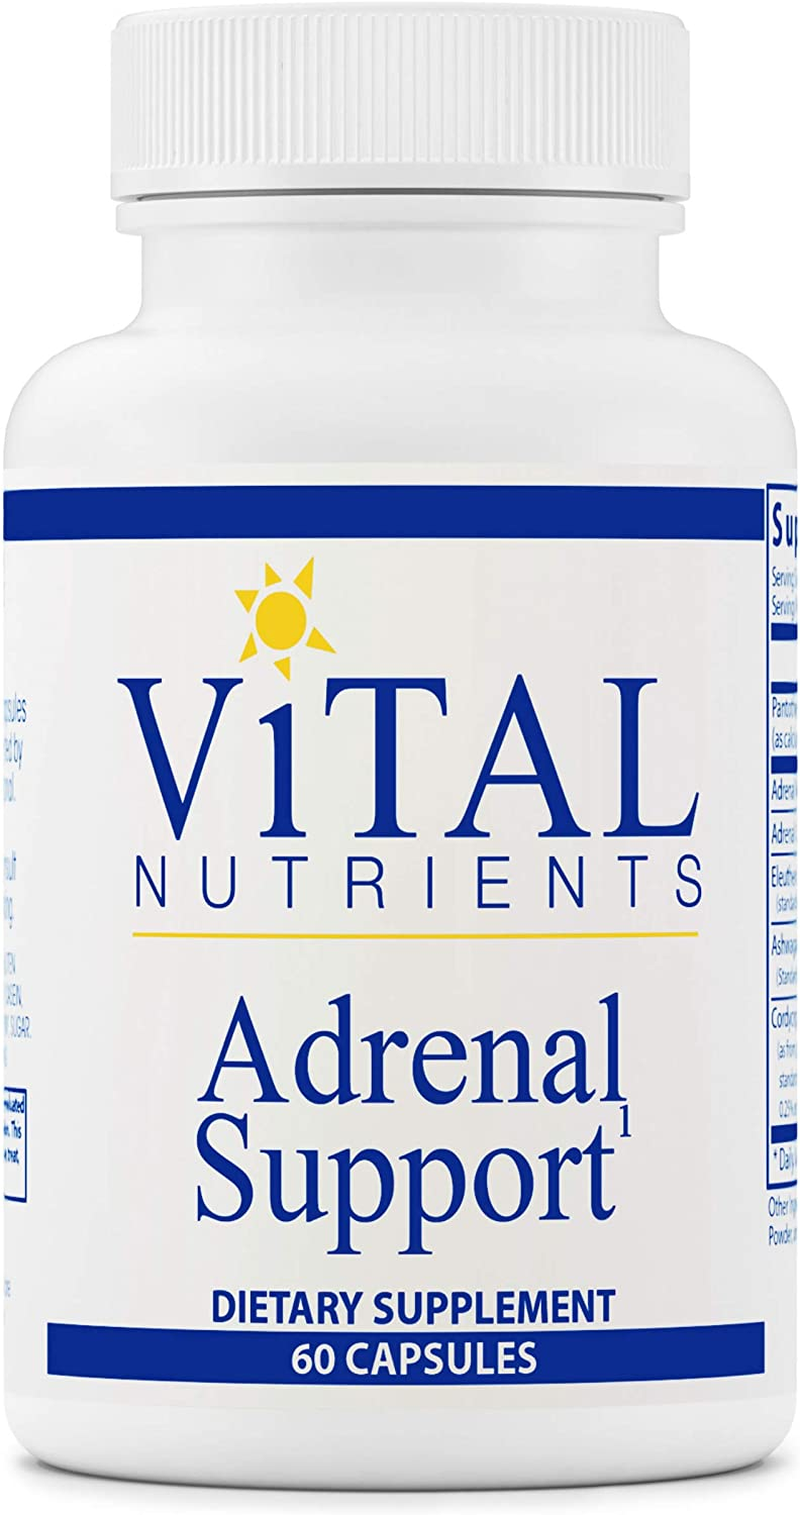 - Adrenal Support - Suitable for Men and Women - Supports Adrenal Gland Function, Supports Mild Stress and Anxiety, and Supports a Healthy Immune System - 60 Capsules